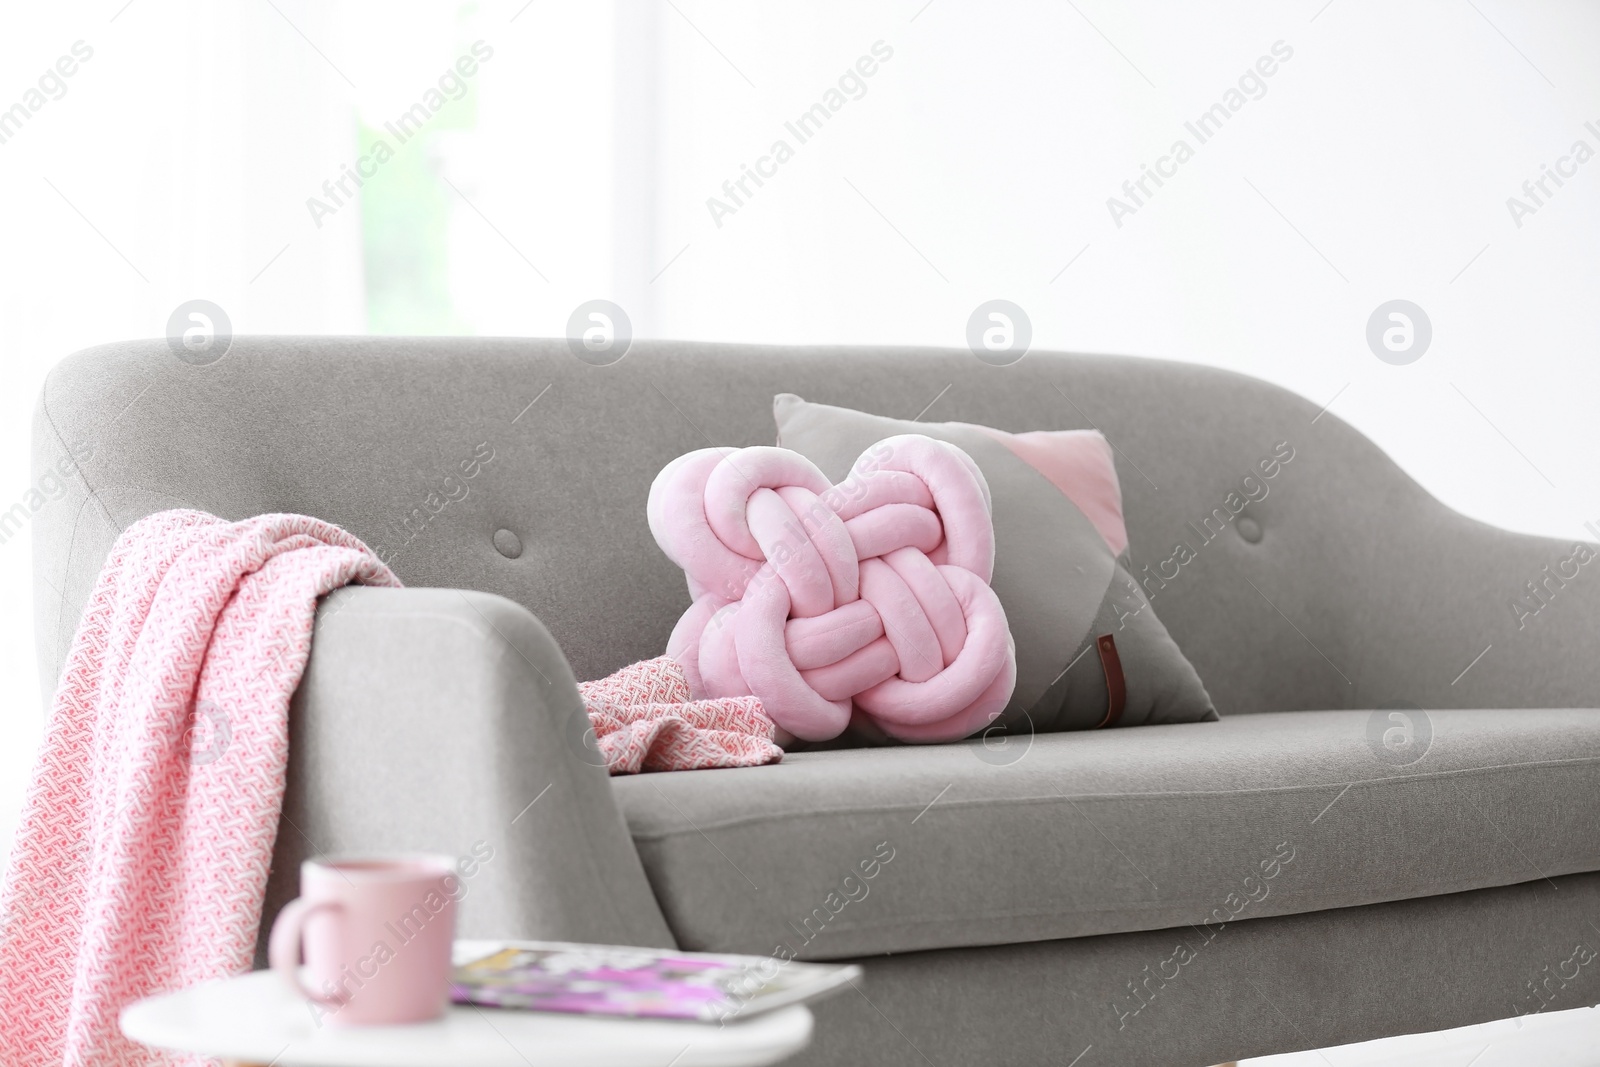 Photo of Pillows and plaid on sofa indoors. Unusual cushion design